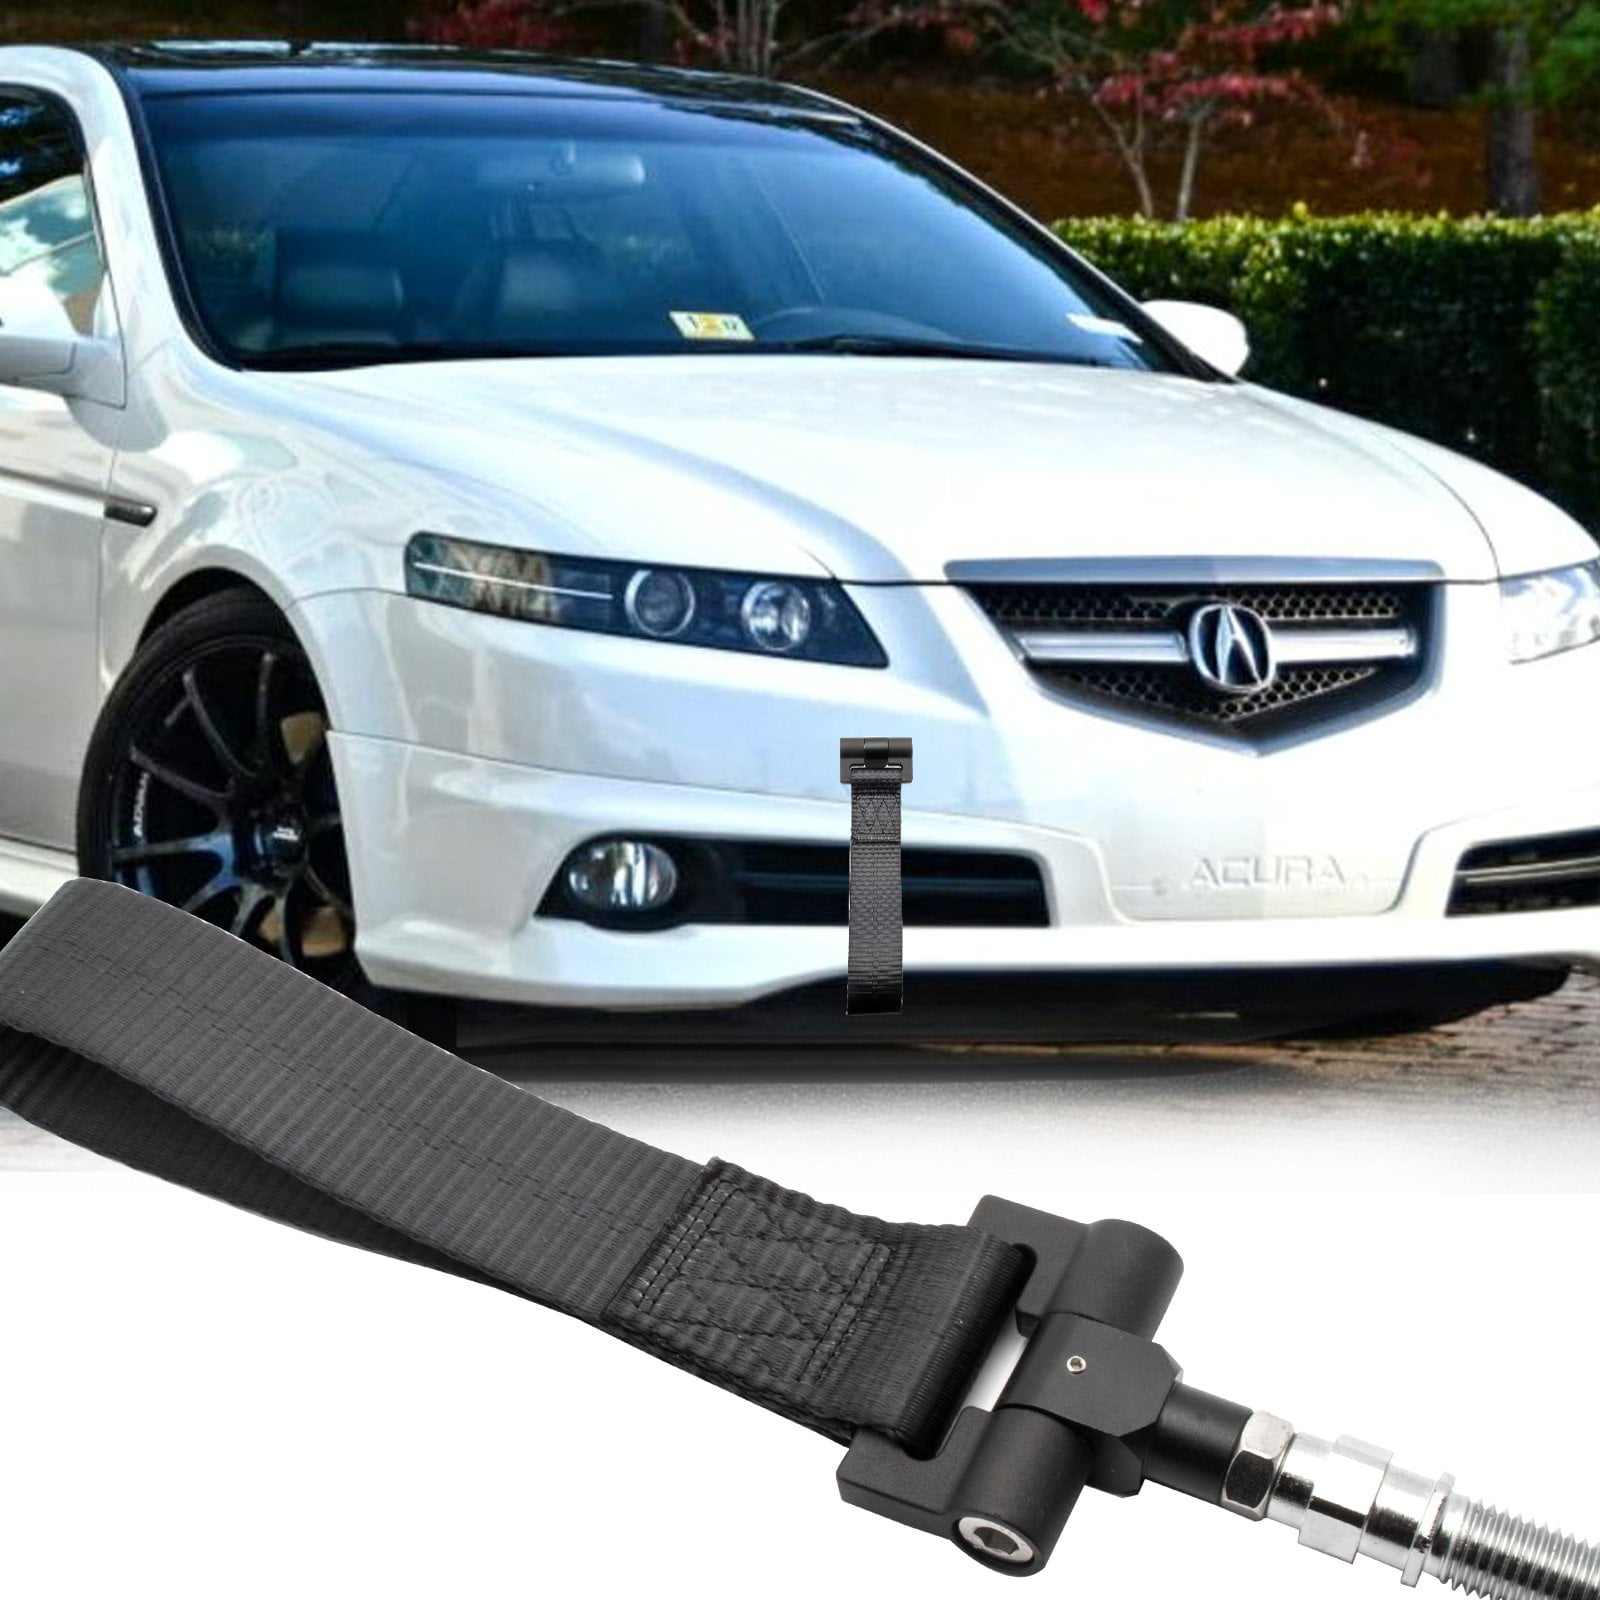 Xotic Tech Black JDM Sporty Tow Hook Adapter with Towing Strap for Honda Insight 2011-2014 